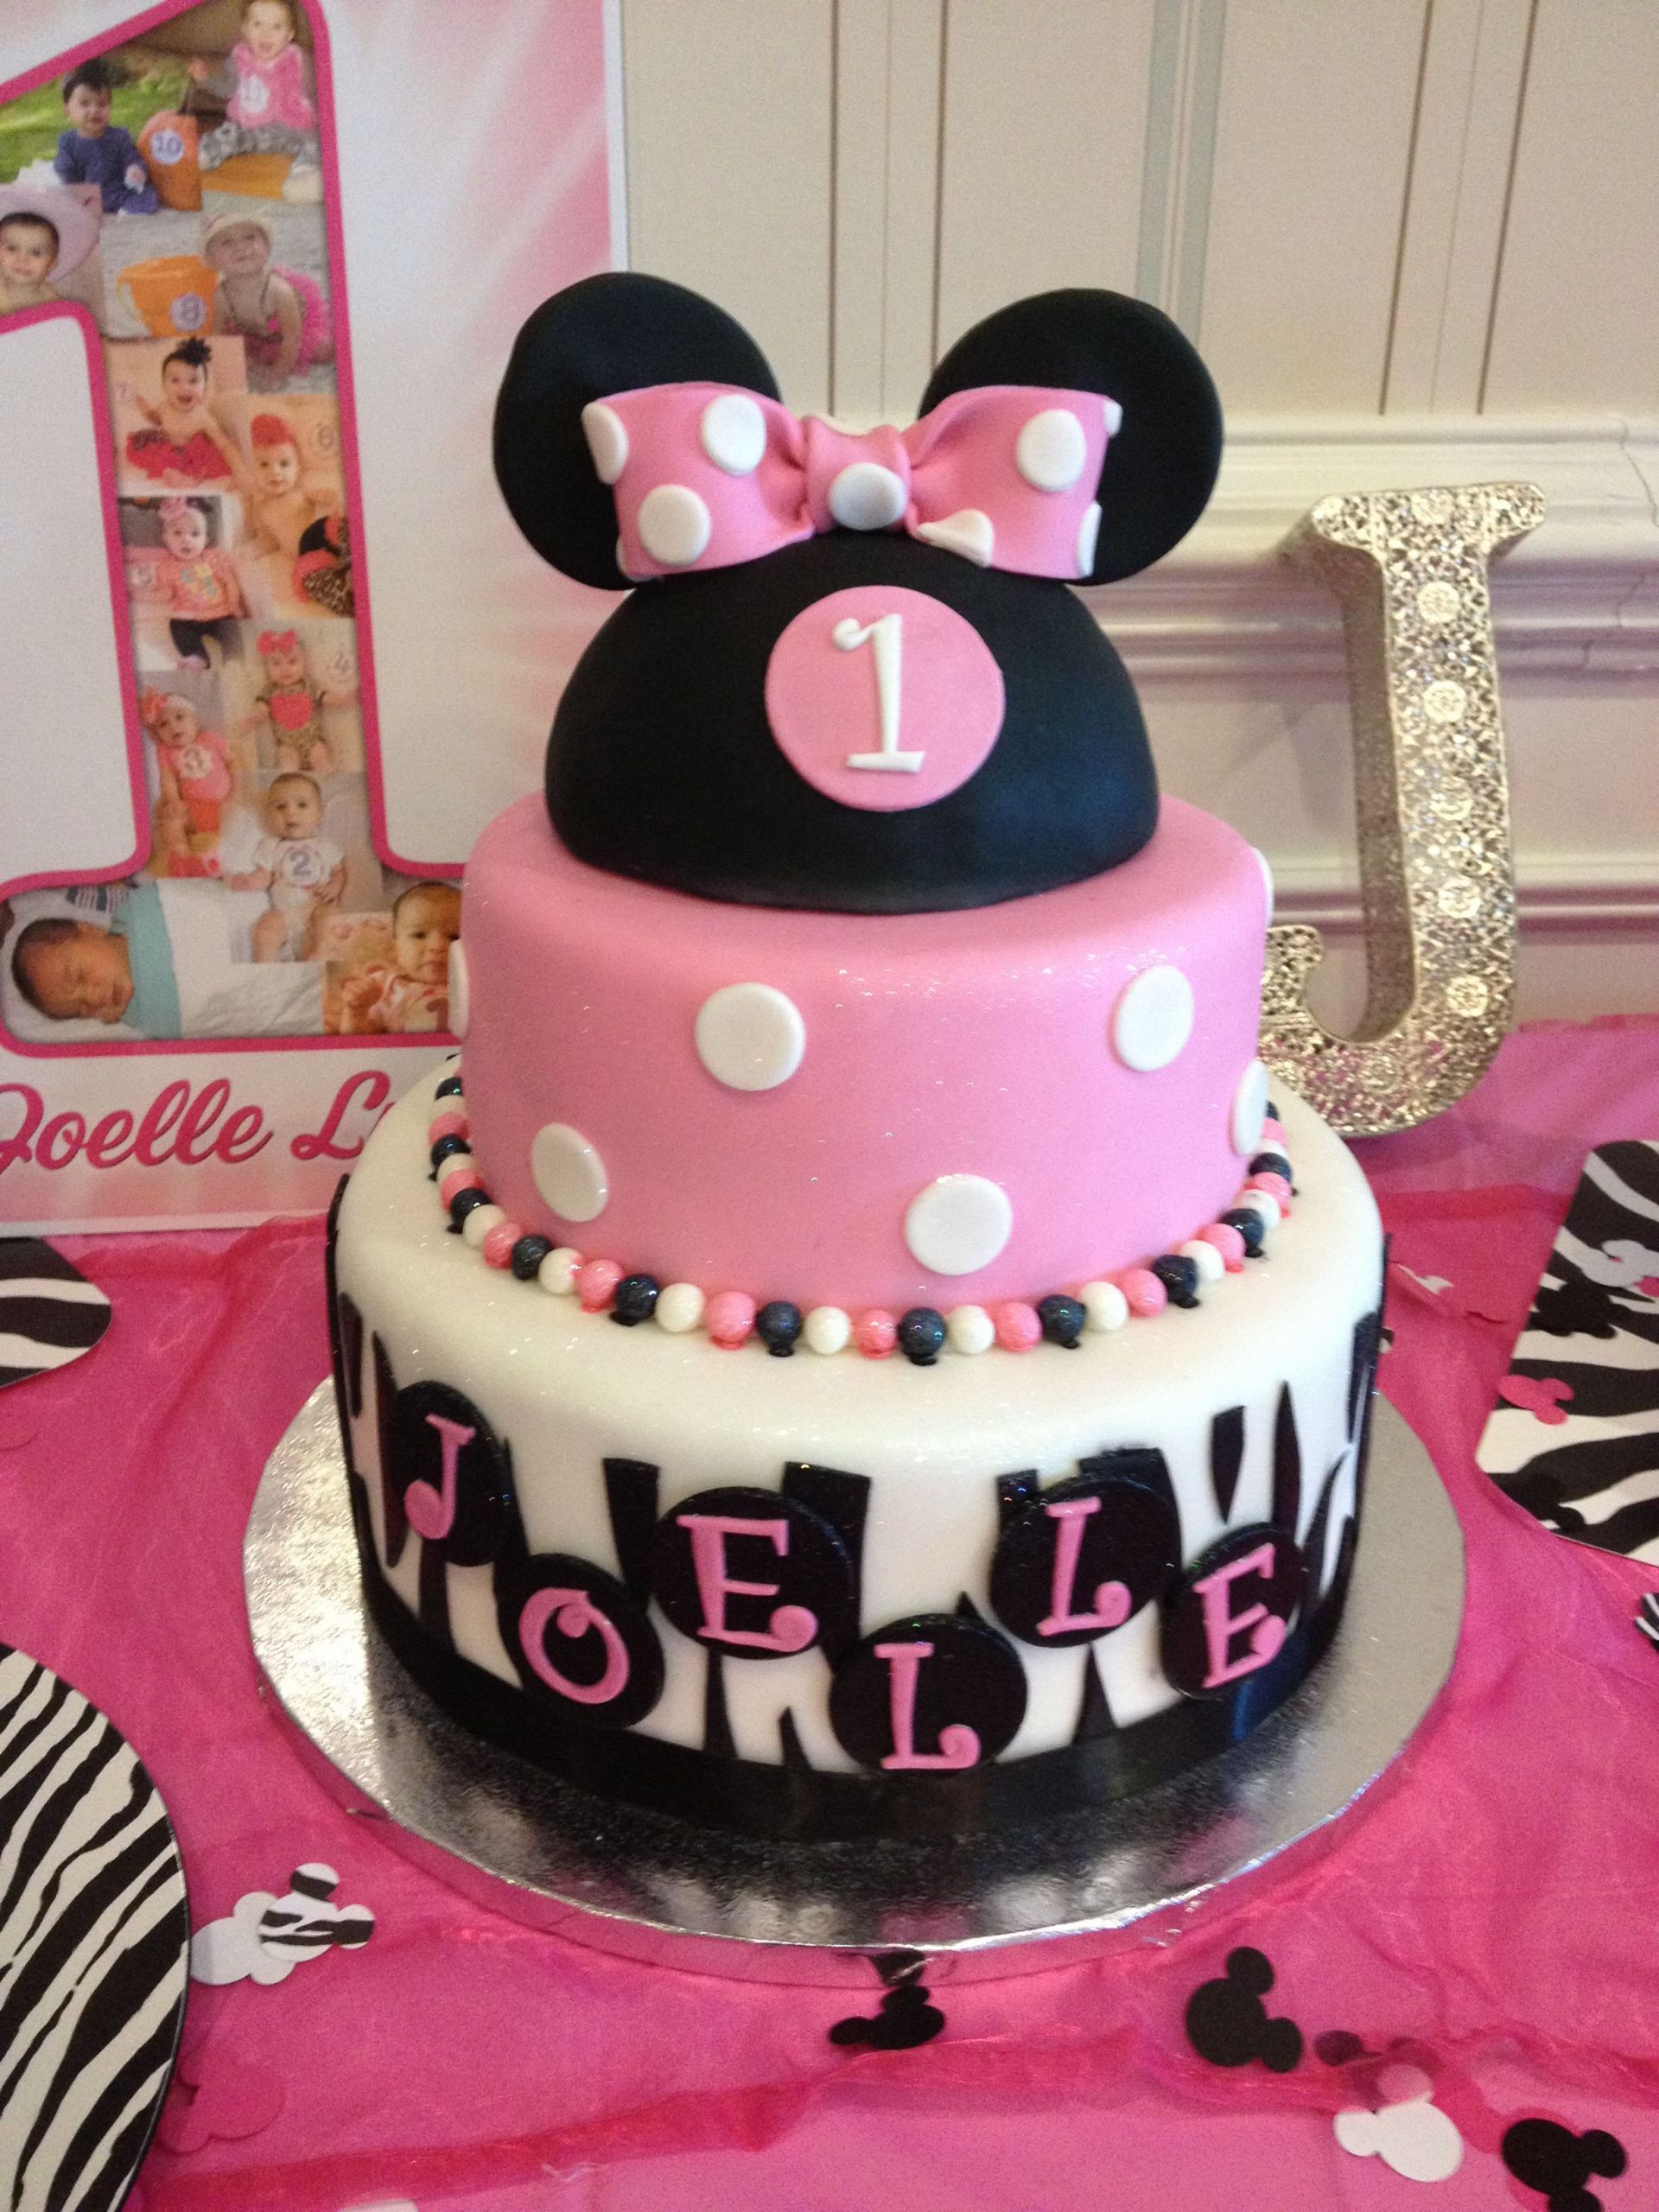 Birthday Gift Ideas For Baby Girl
 Yummy dessert table for my baby girls 1st birthday party